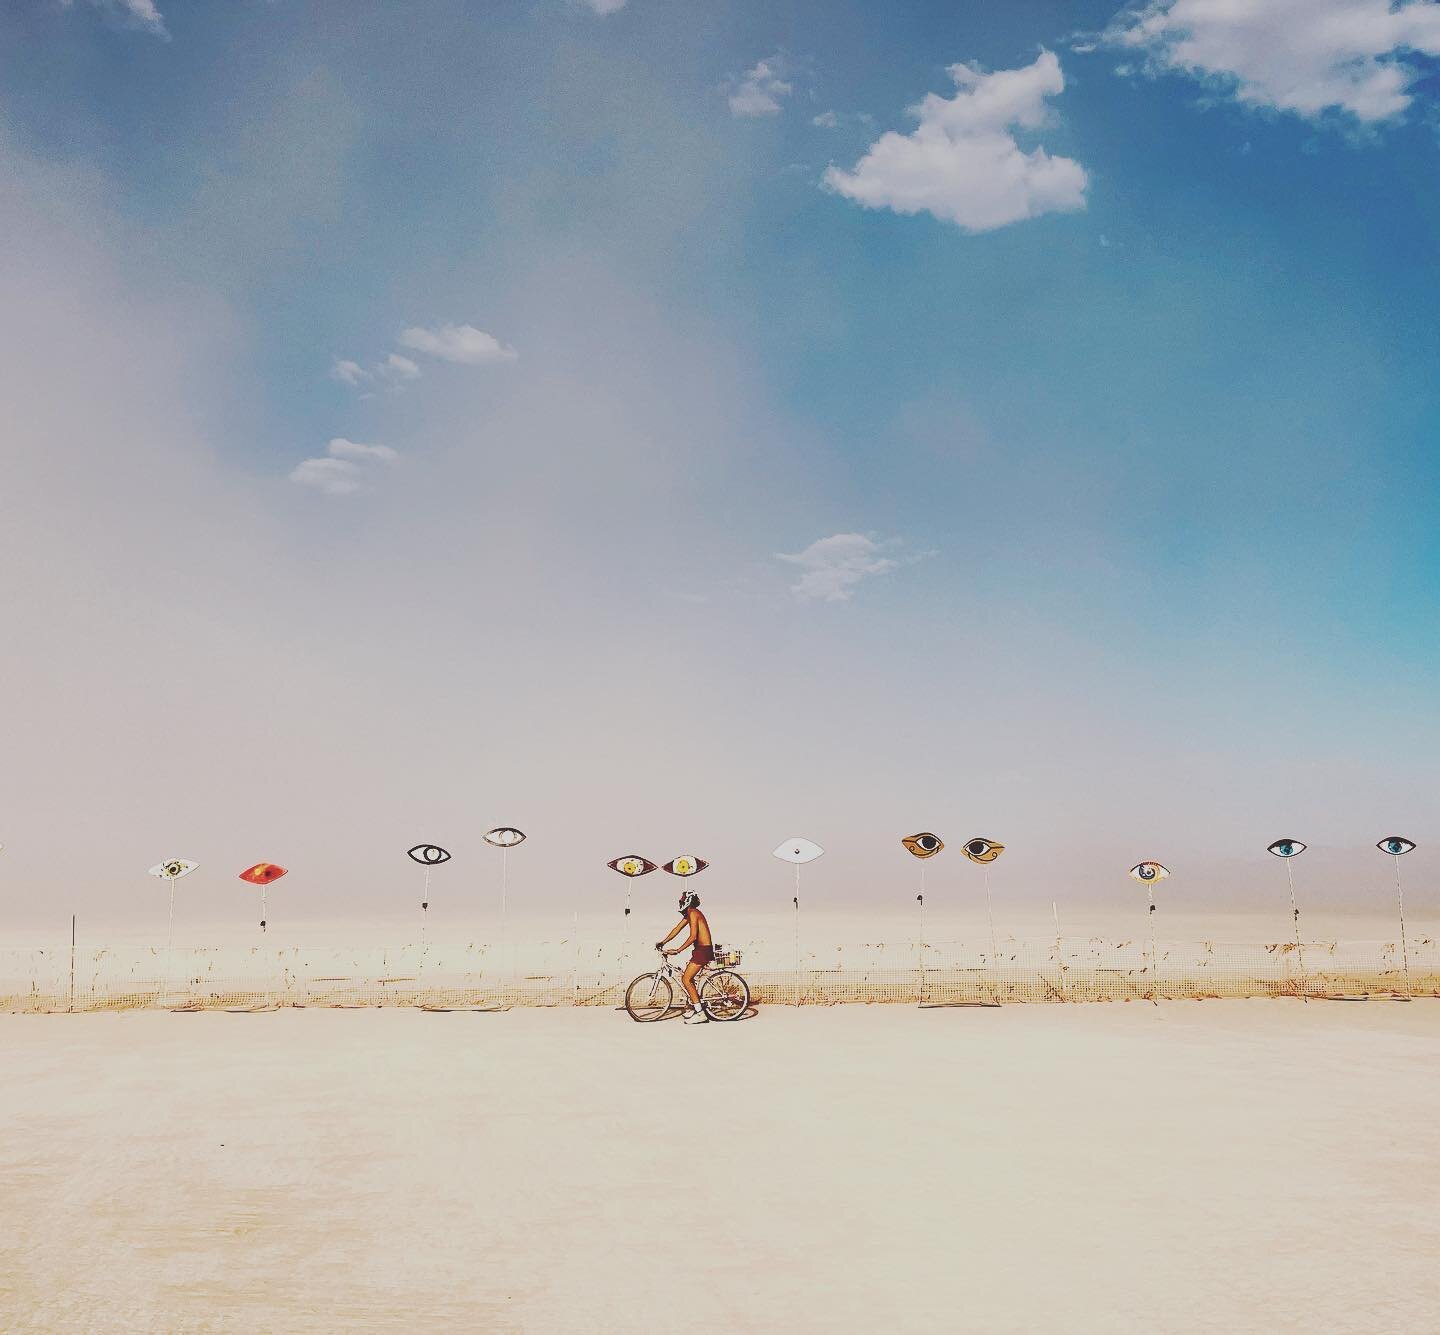 Cycled out into the desert for an adventure to the trash fence when a dust storm rolled in. First of all the city vanished and then we vanished and the whole world went white. I should add that I was the idiot in literally just swimsuit - but it did 